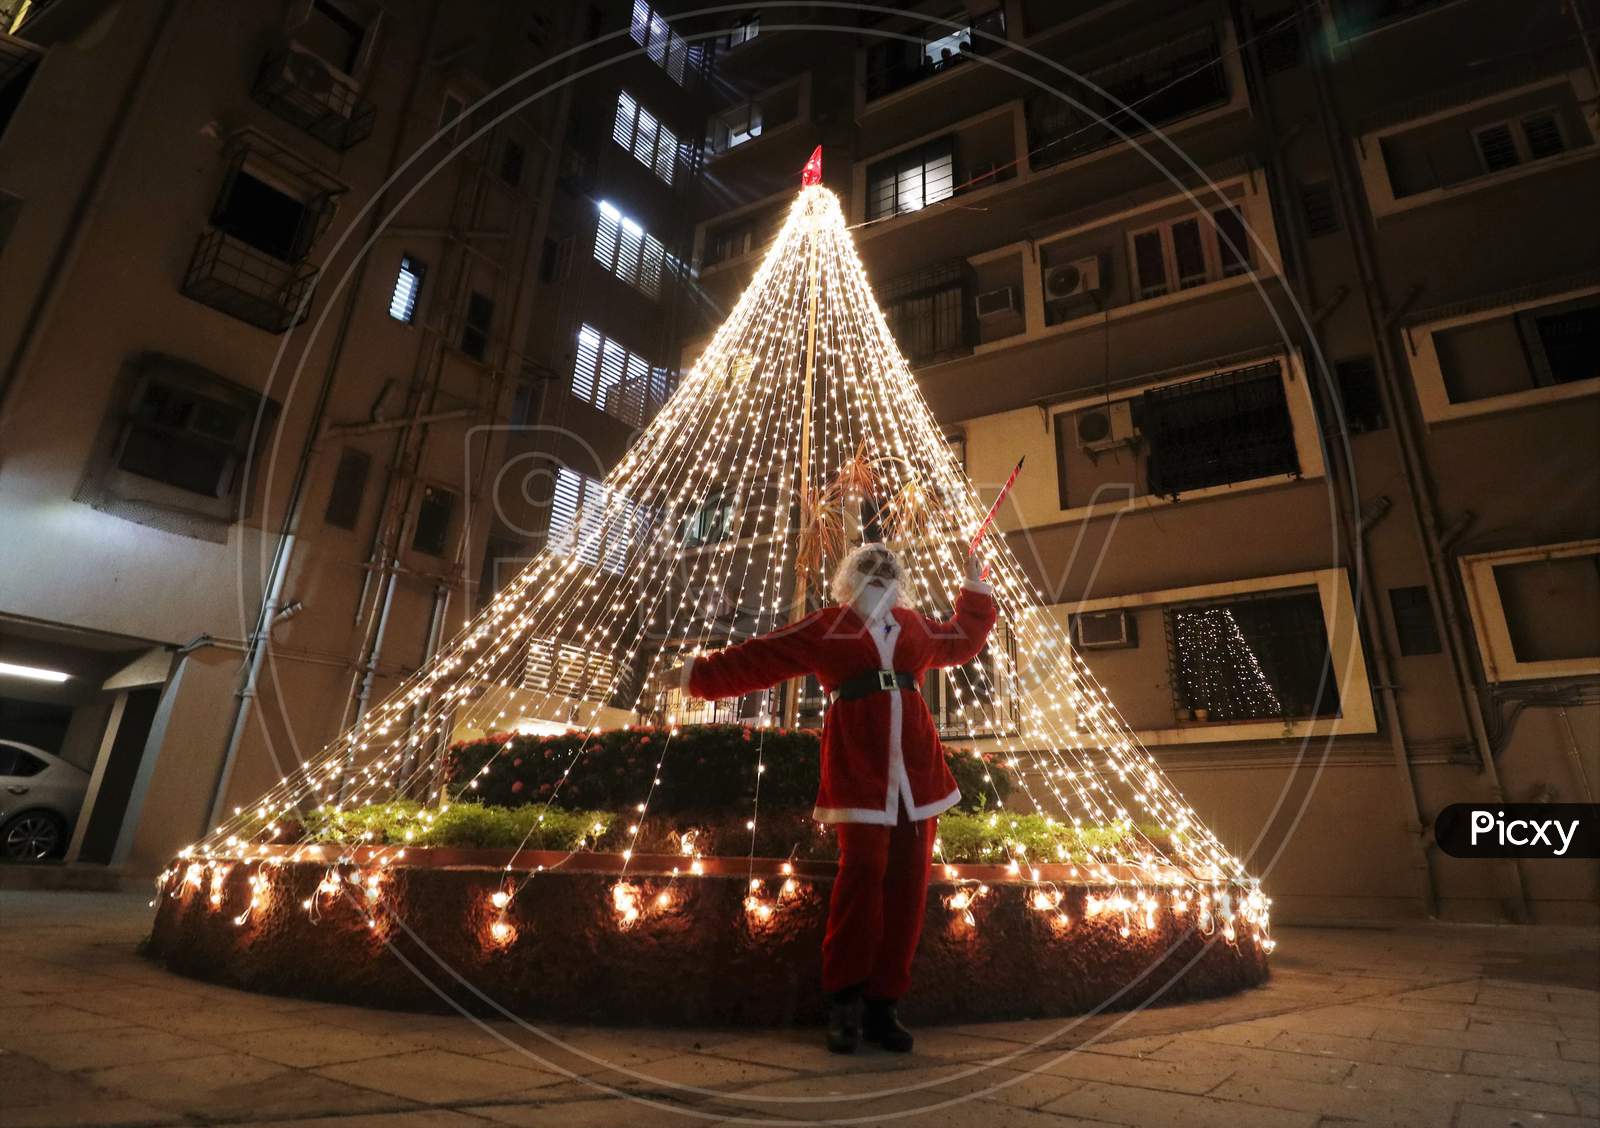 A woman dressed as Santa Claus poses for a picture at a residential area on Christmas eve in Mumbai, India, December 24, 2020.